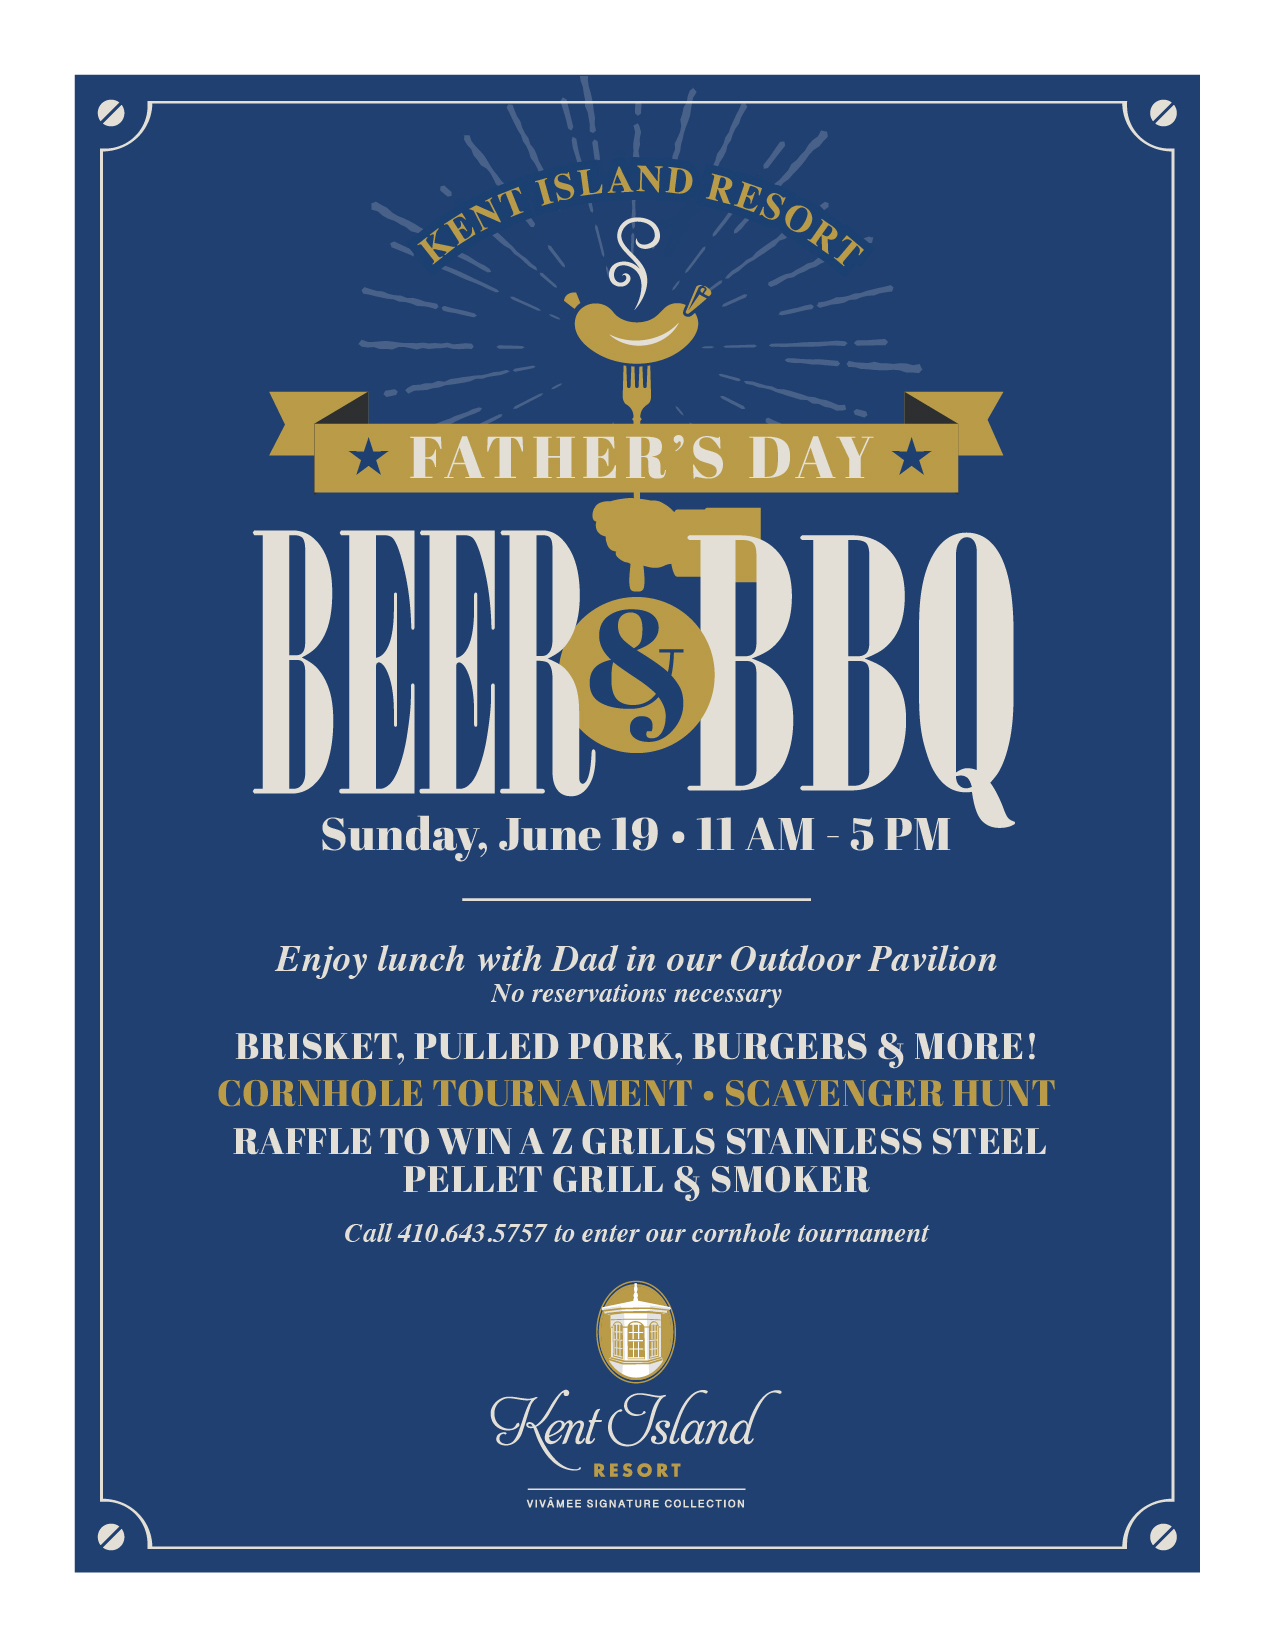 Fathers Day Kent Island Resort Beer & BBQ